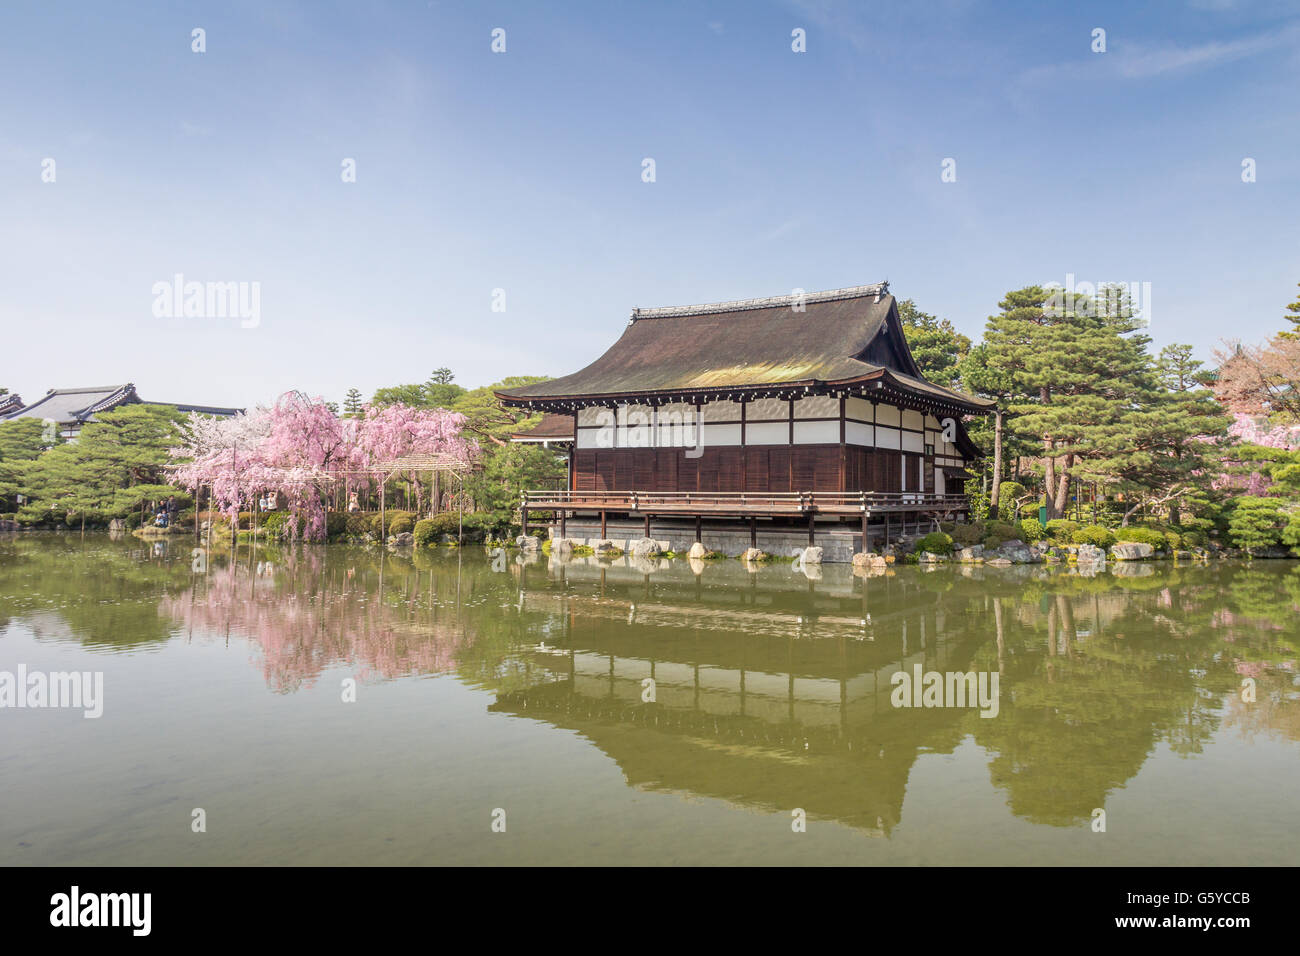 Garden in Kyoto imperial palace Stock Photo